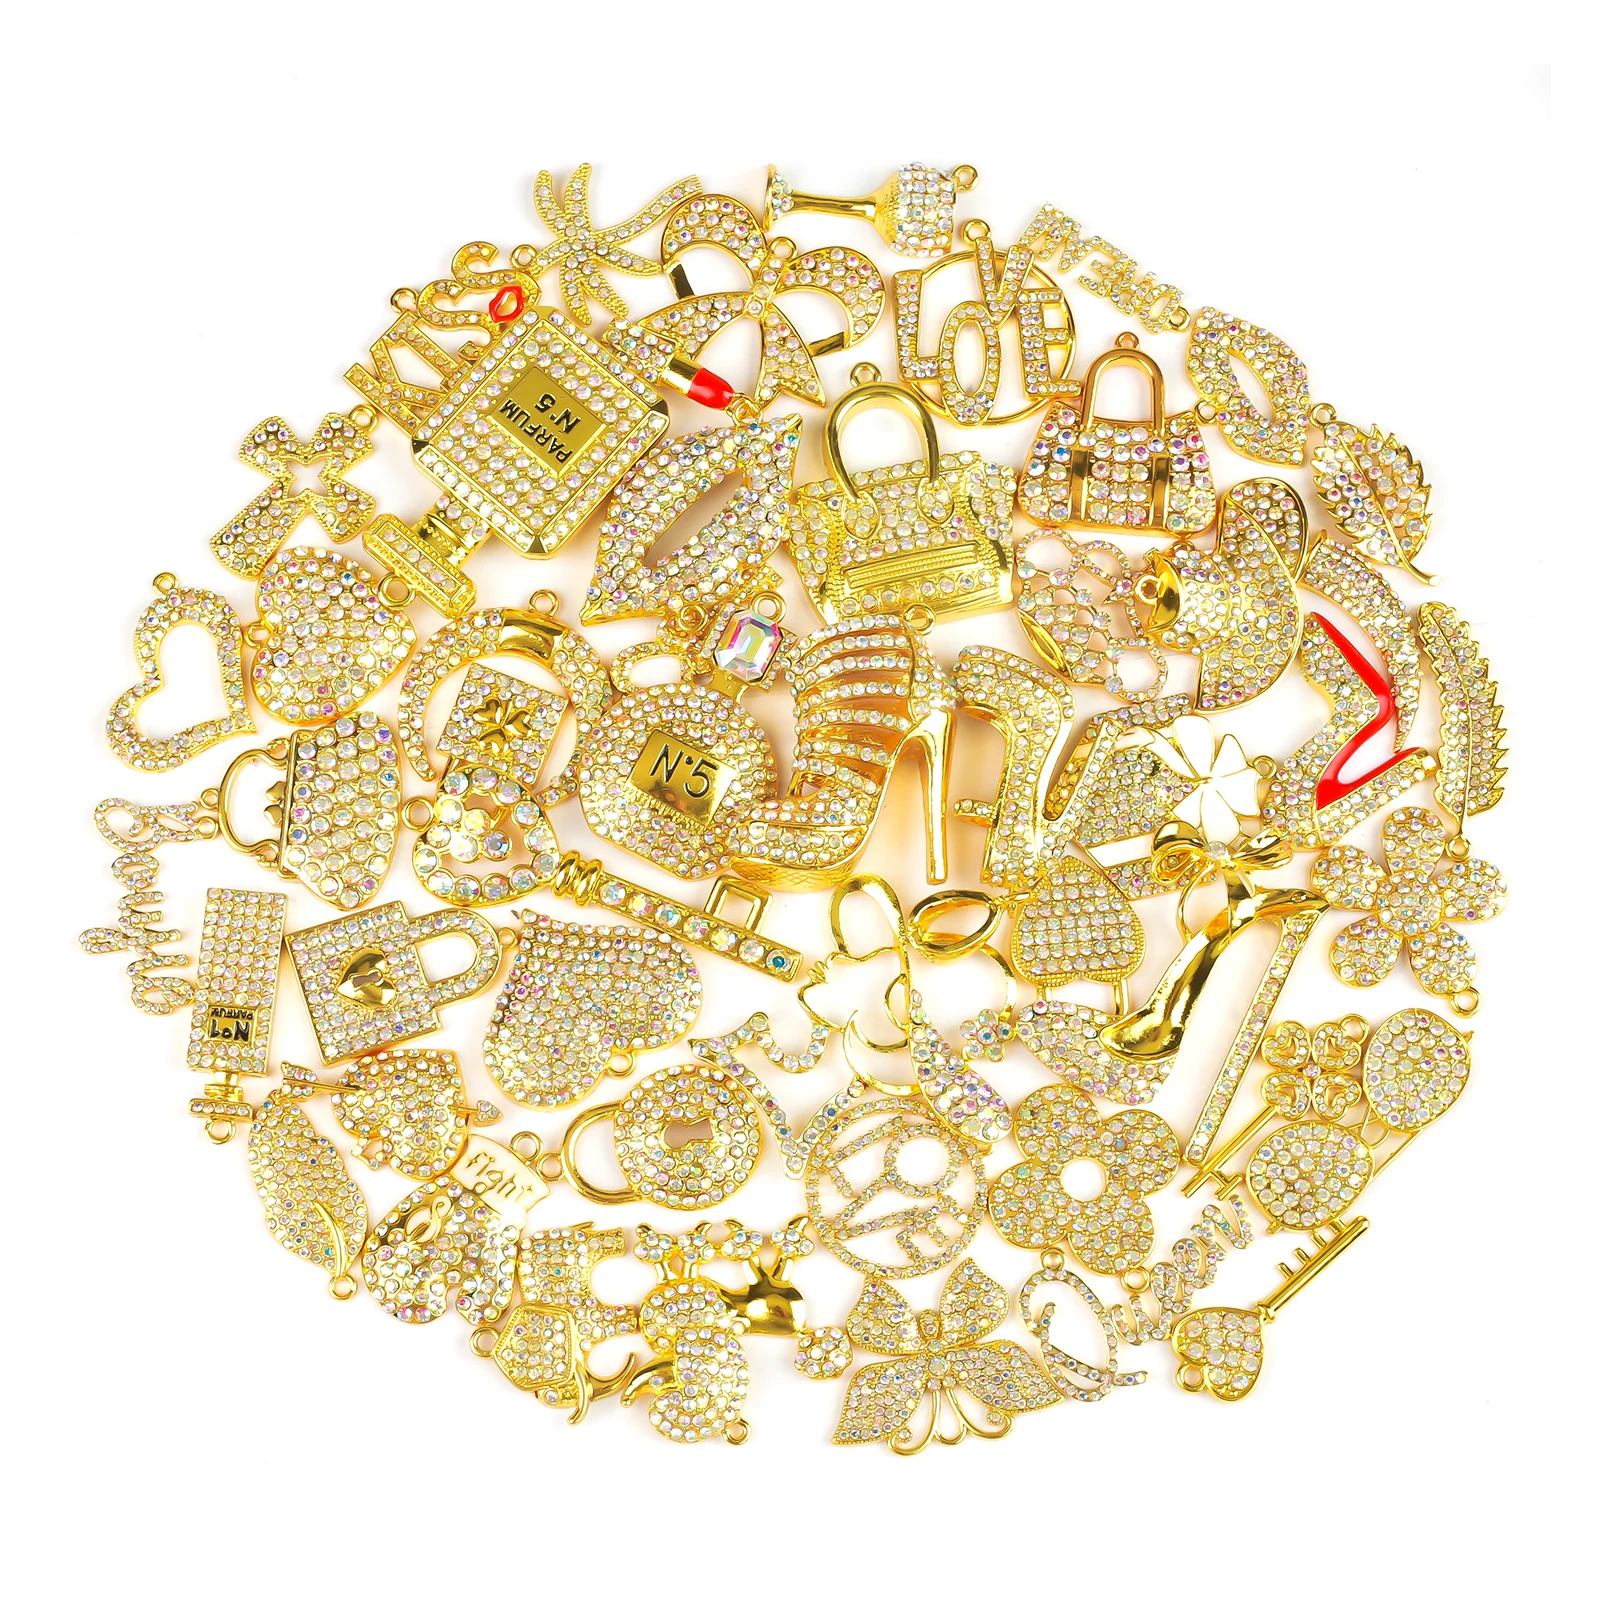 50pcs Mixed Gold Plated Charms Fit For DIY jewelry Making  Accessories M0001-M0064